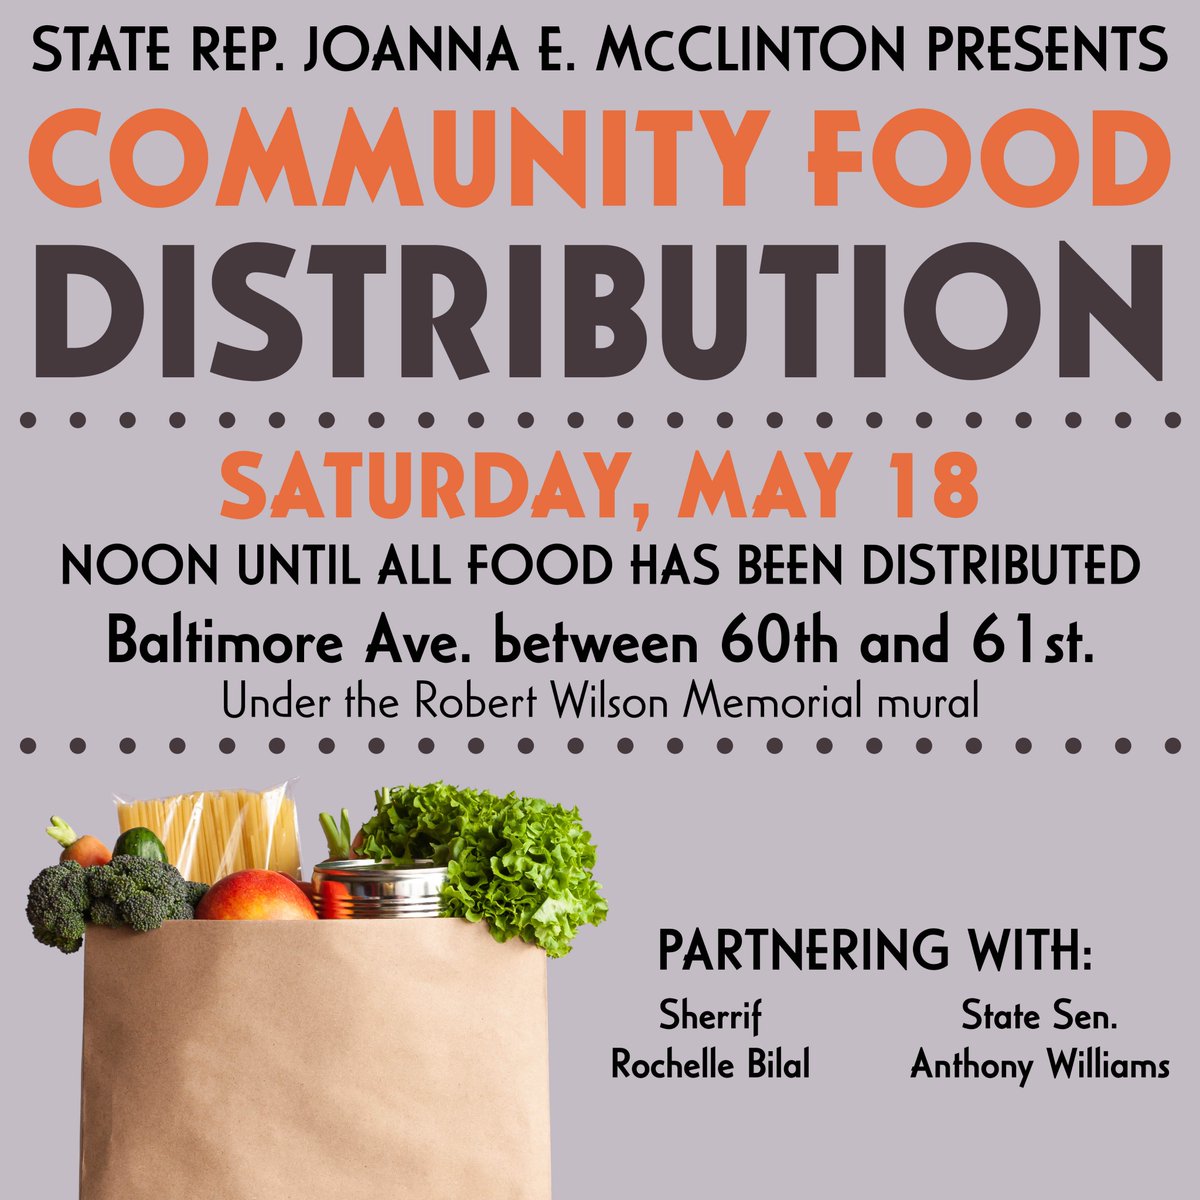 #WestPhilly #SouthwestPhilly #CobbsCreek Neighbors, Join @PhilaSheriff, @SenTonyWilliams & I THIS SATURDAY for our community food distribution at Baltimore Ave. between 60th & 61st. We will be distributing food until we run out! Contact my office for more info at 215-748-6712.